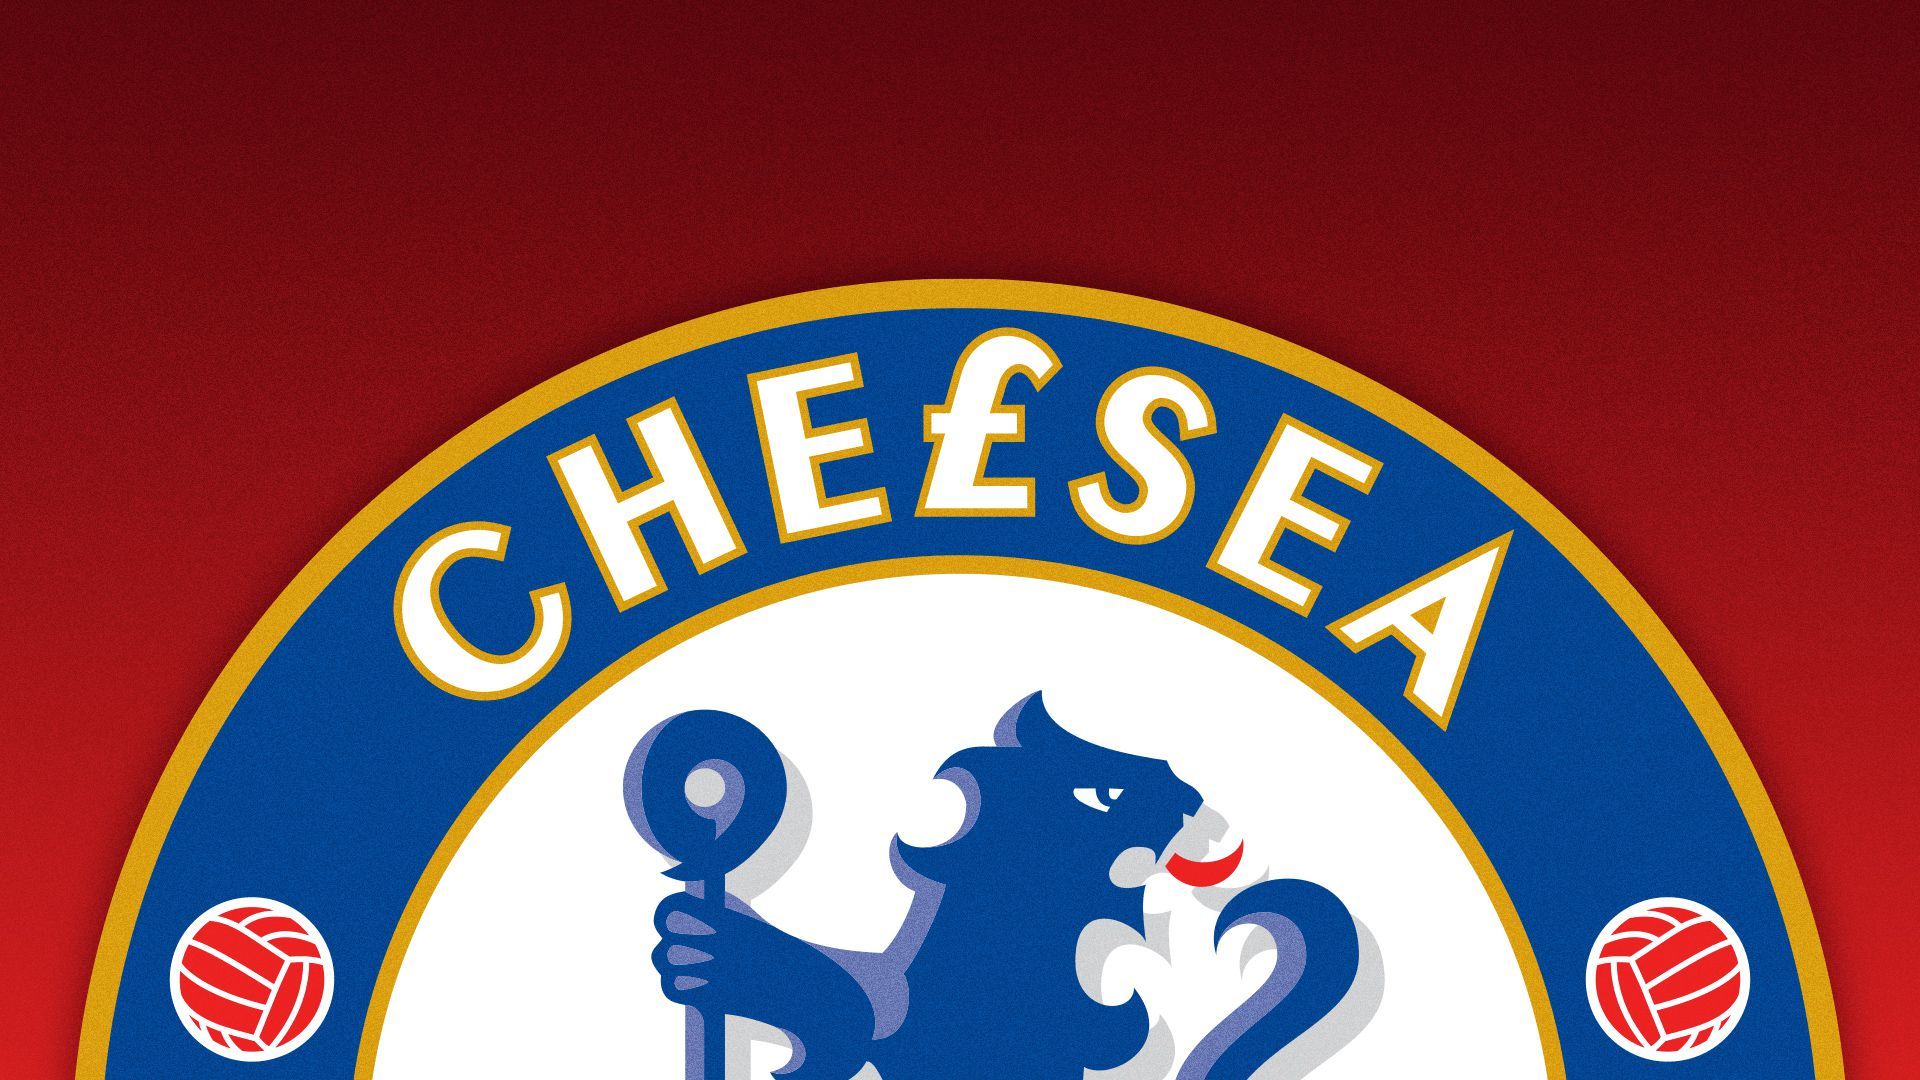 Illustration of the Chelsea FC logo with the 